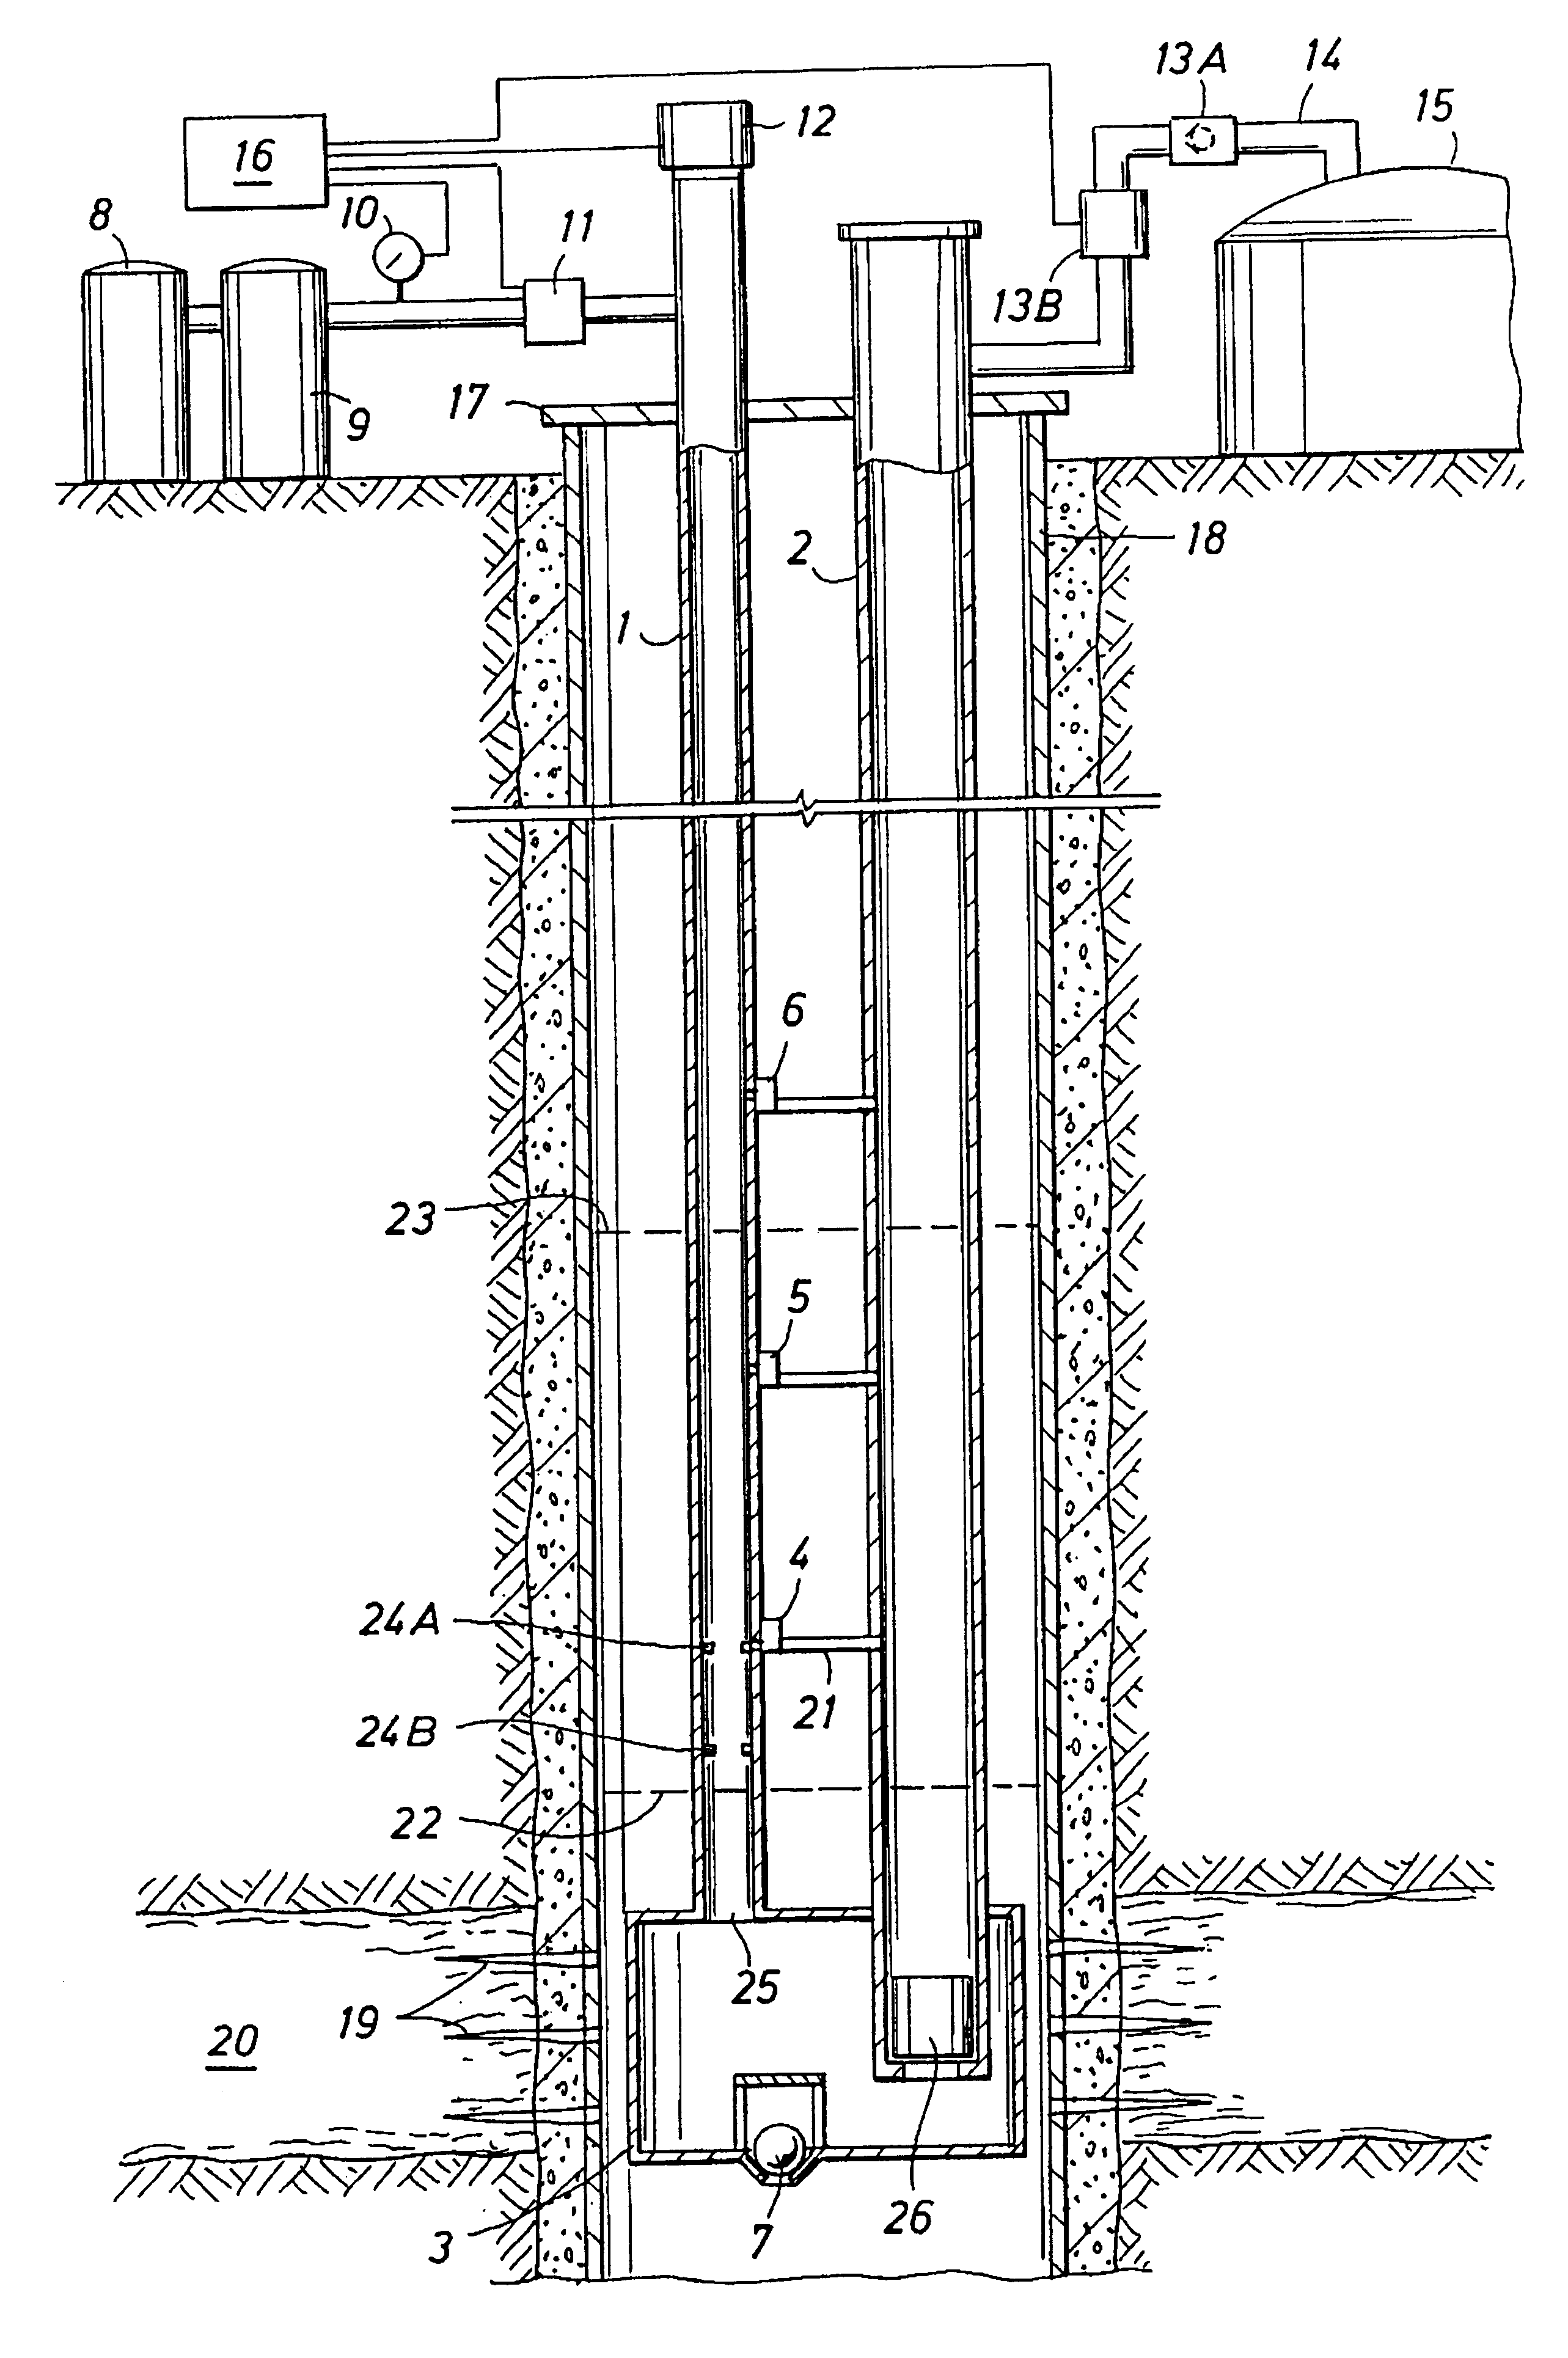 Method and apparatus for gas lift system for oil and gas wells